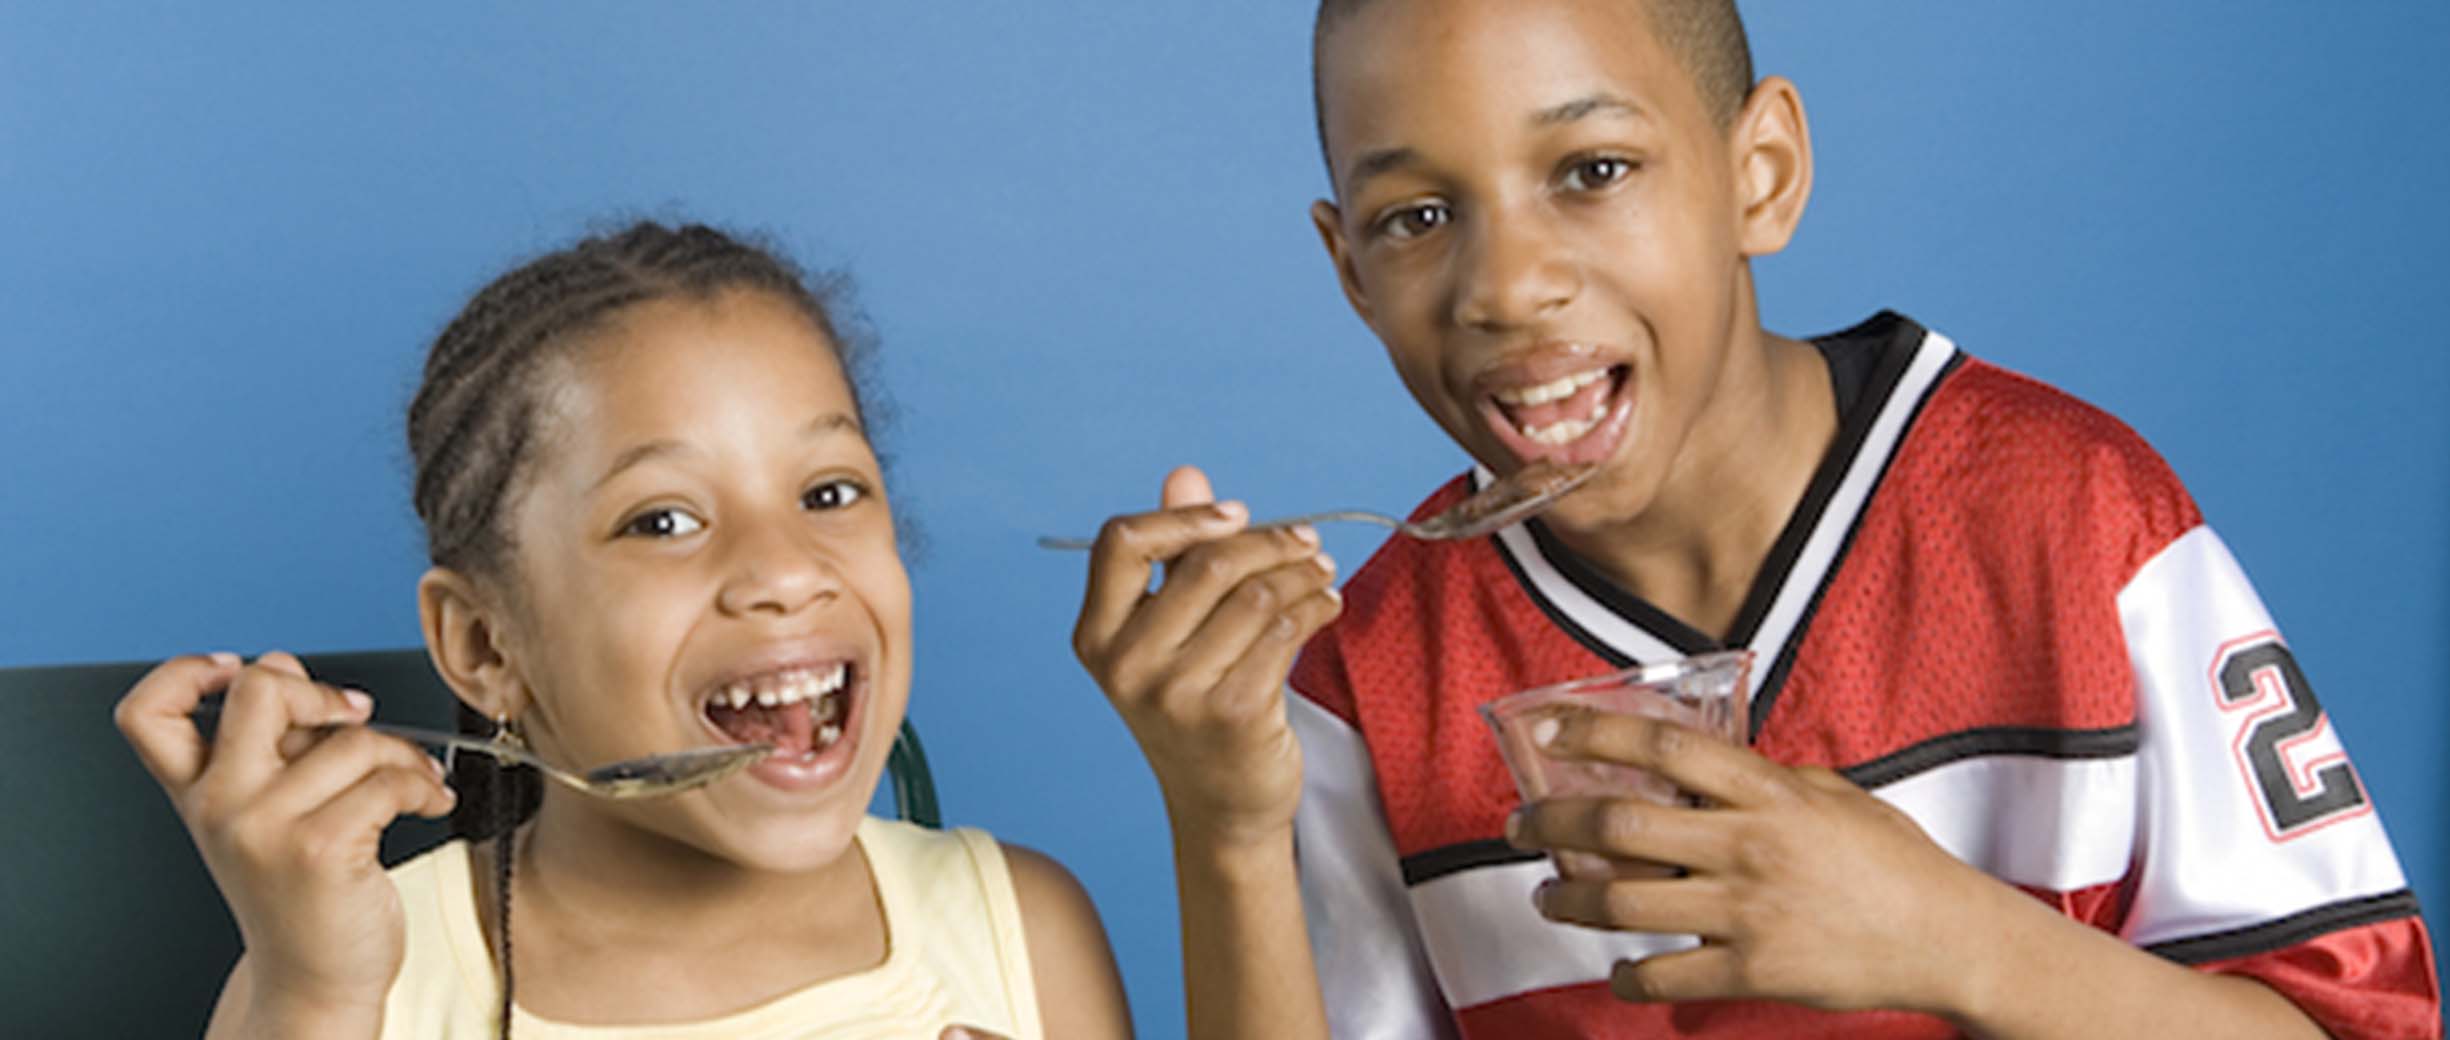 Teach Your Kids How to Make Good Food Choices in 6 Easy Steps